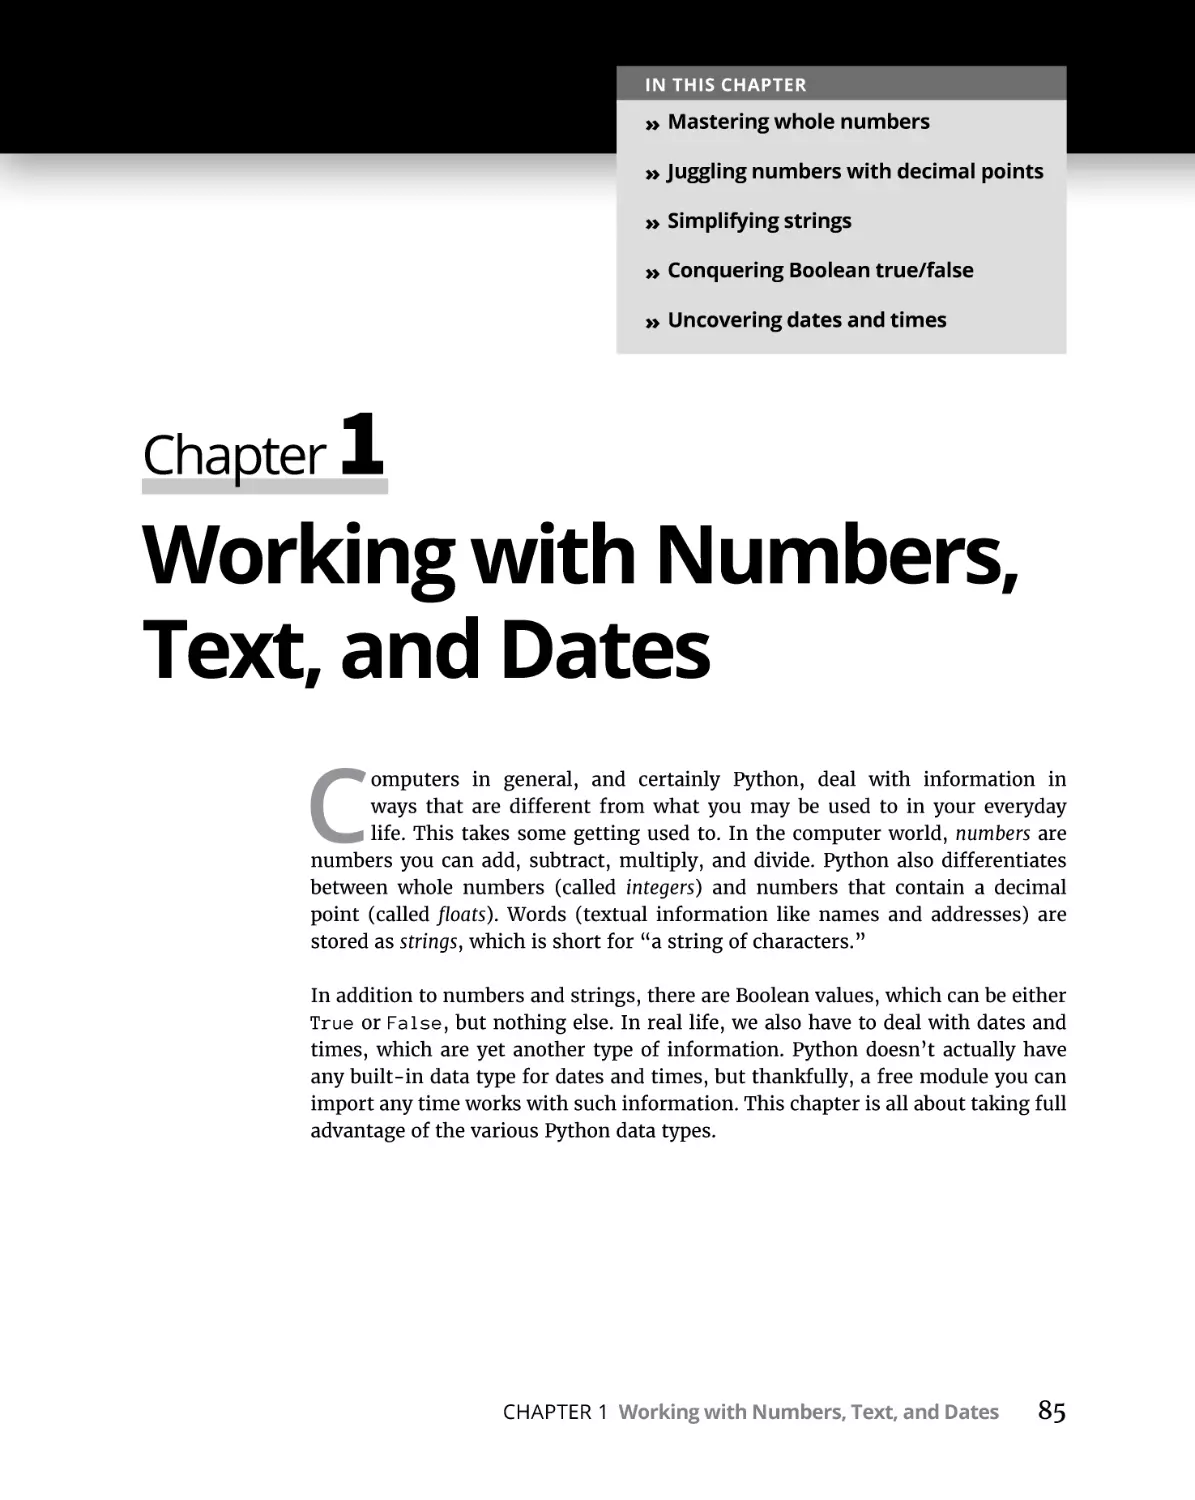 Chapter 1 Working with Numbers, Text, and Dates